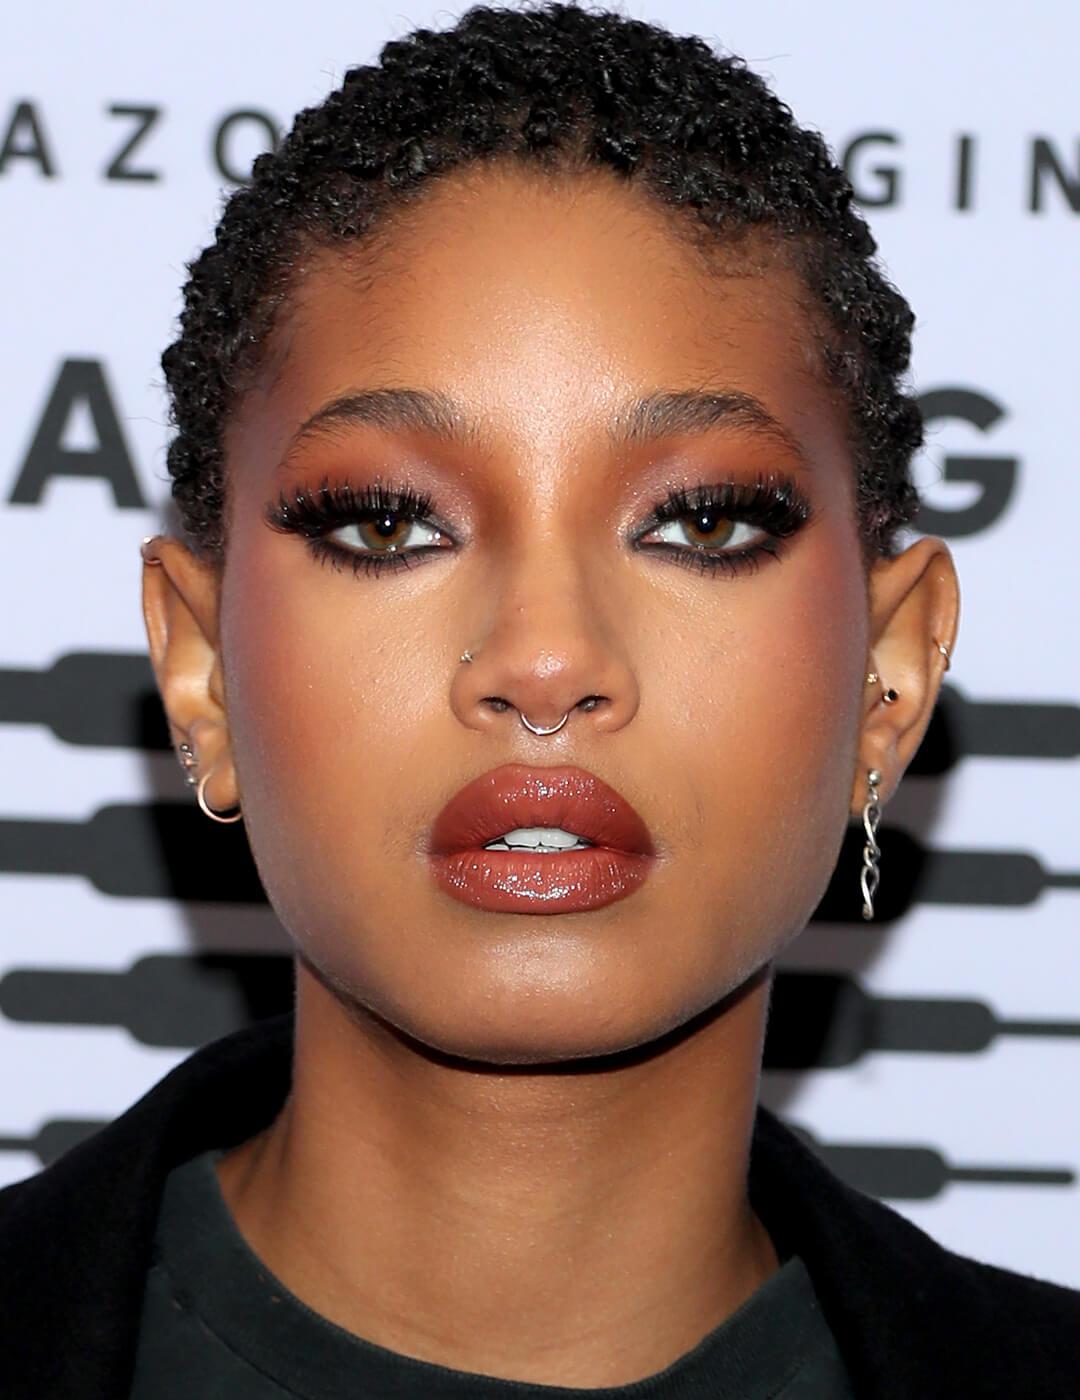 Close-up of Willow Smith looking fierce in a smoky eye makeup look